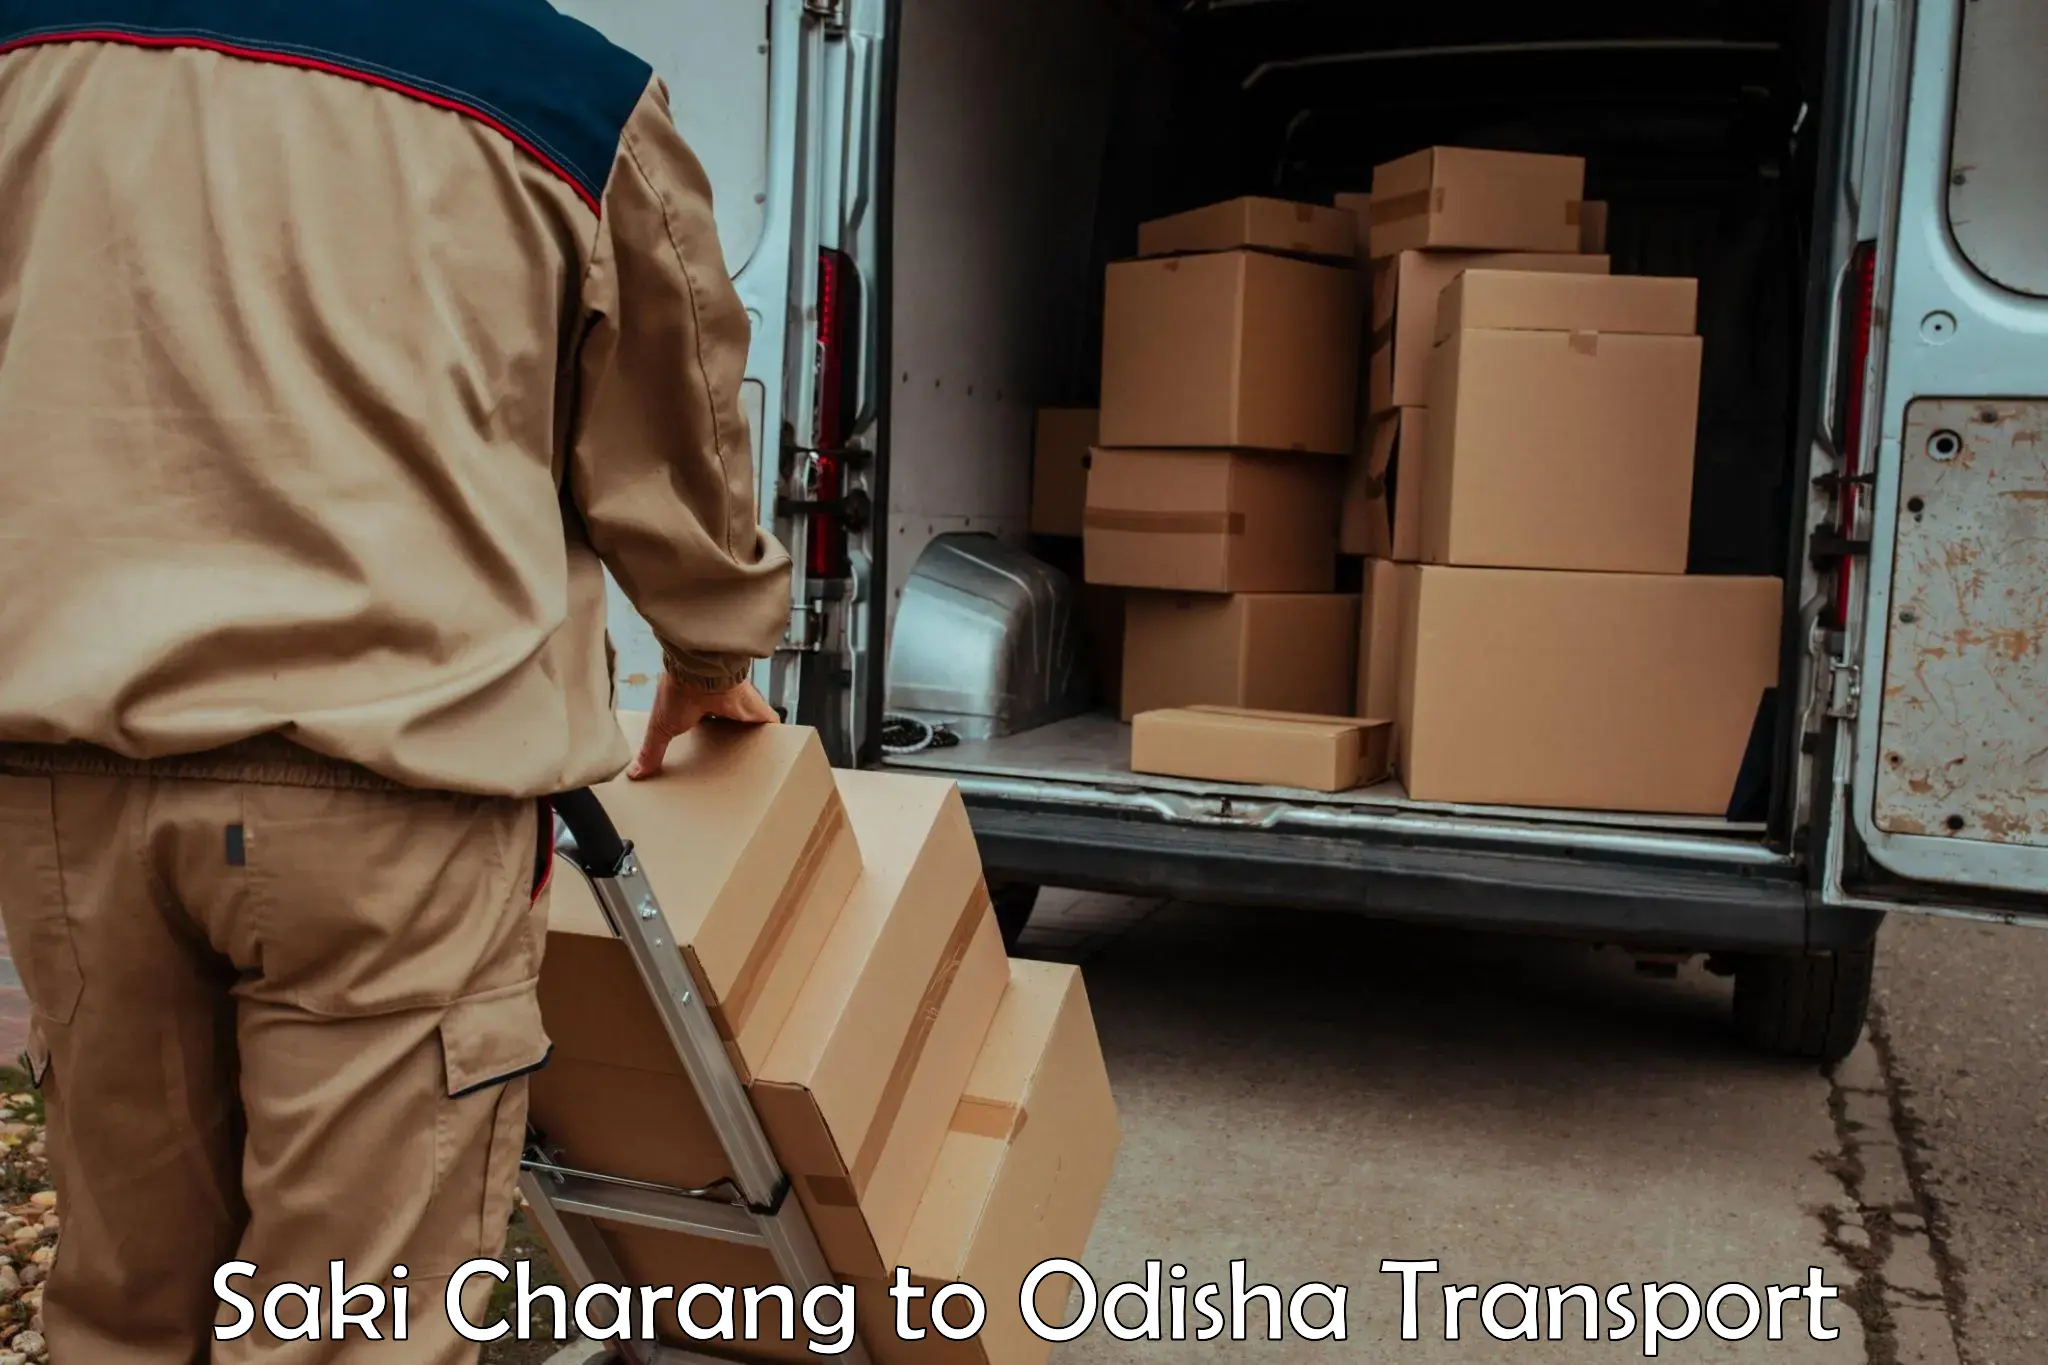 Domestic transport services Saki Charang to Behrampur